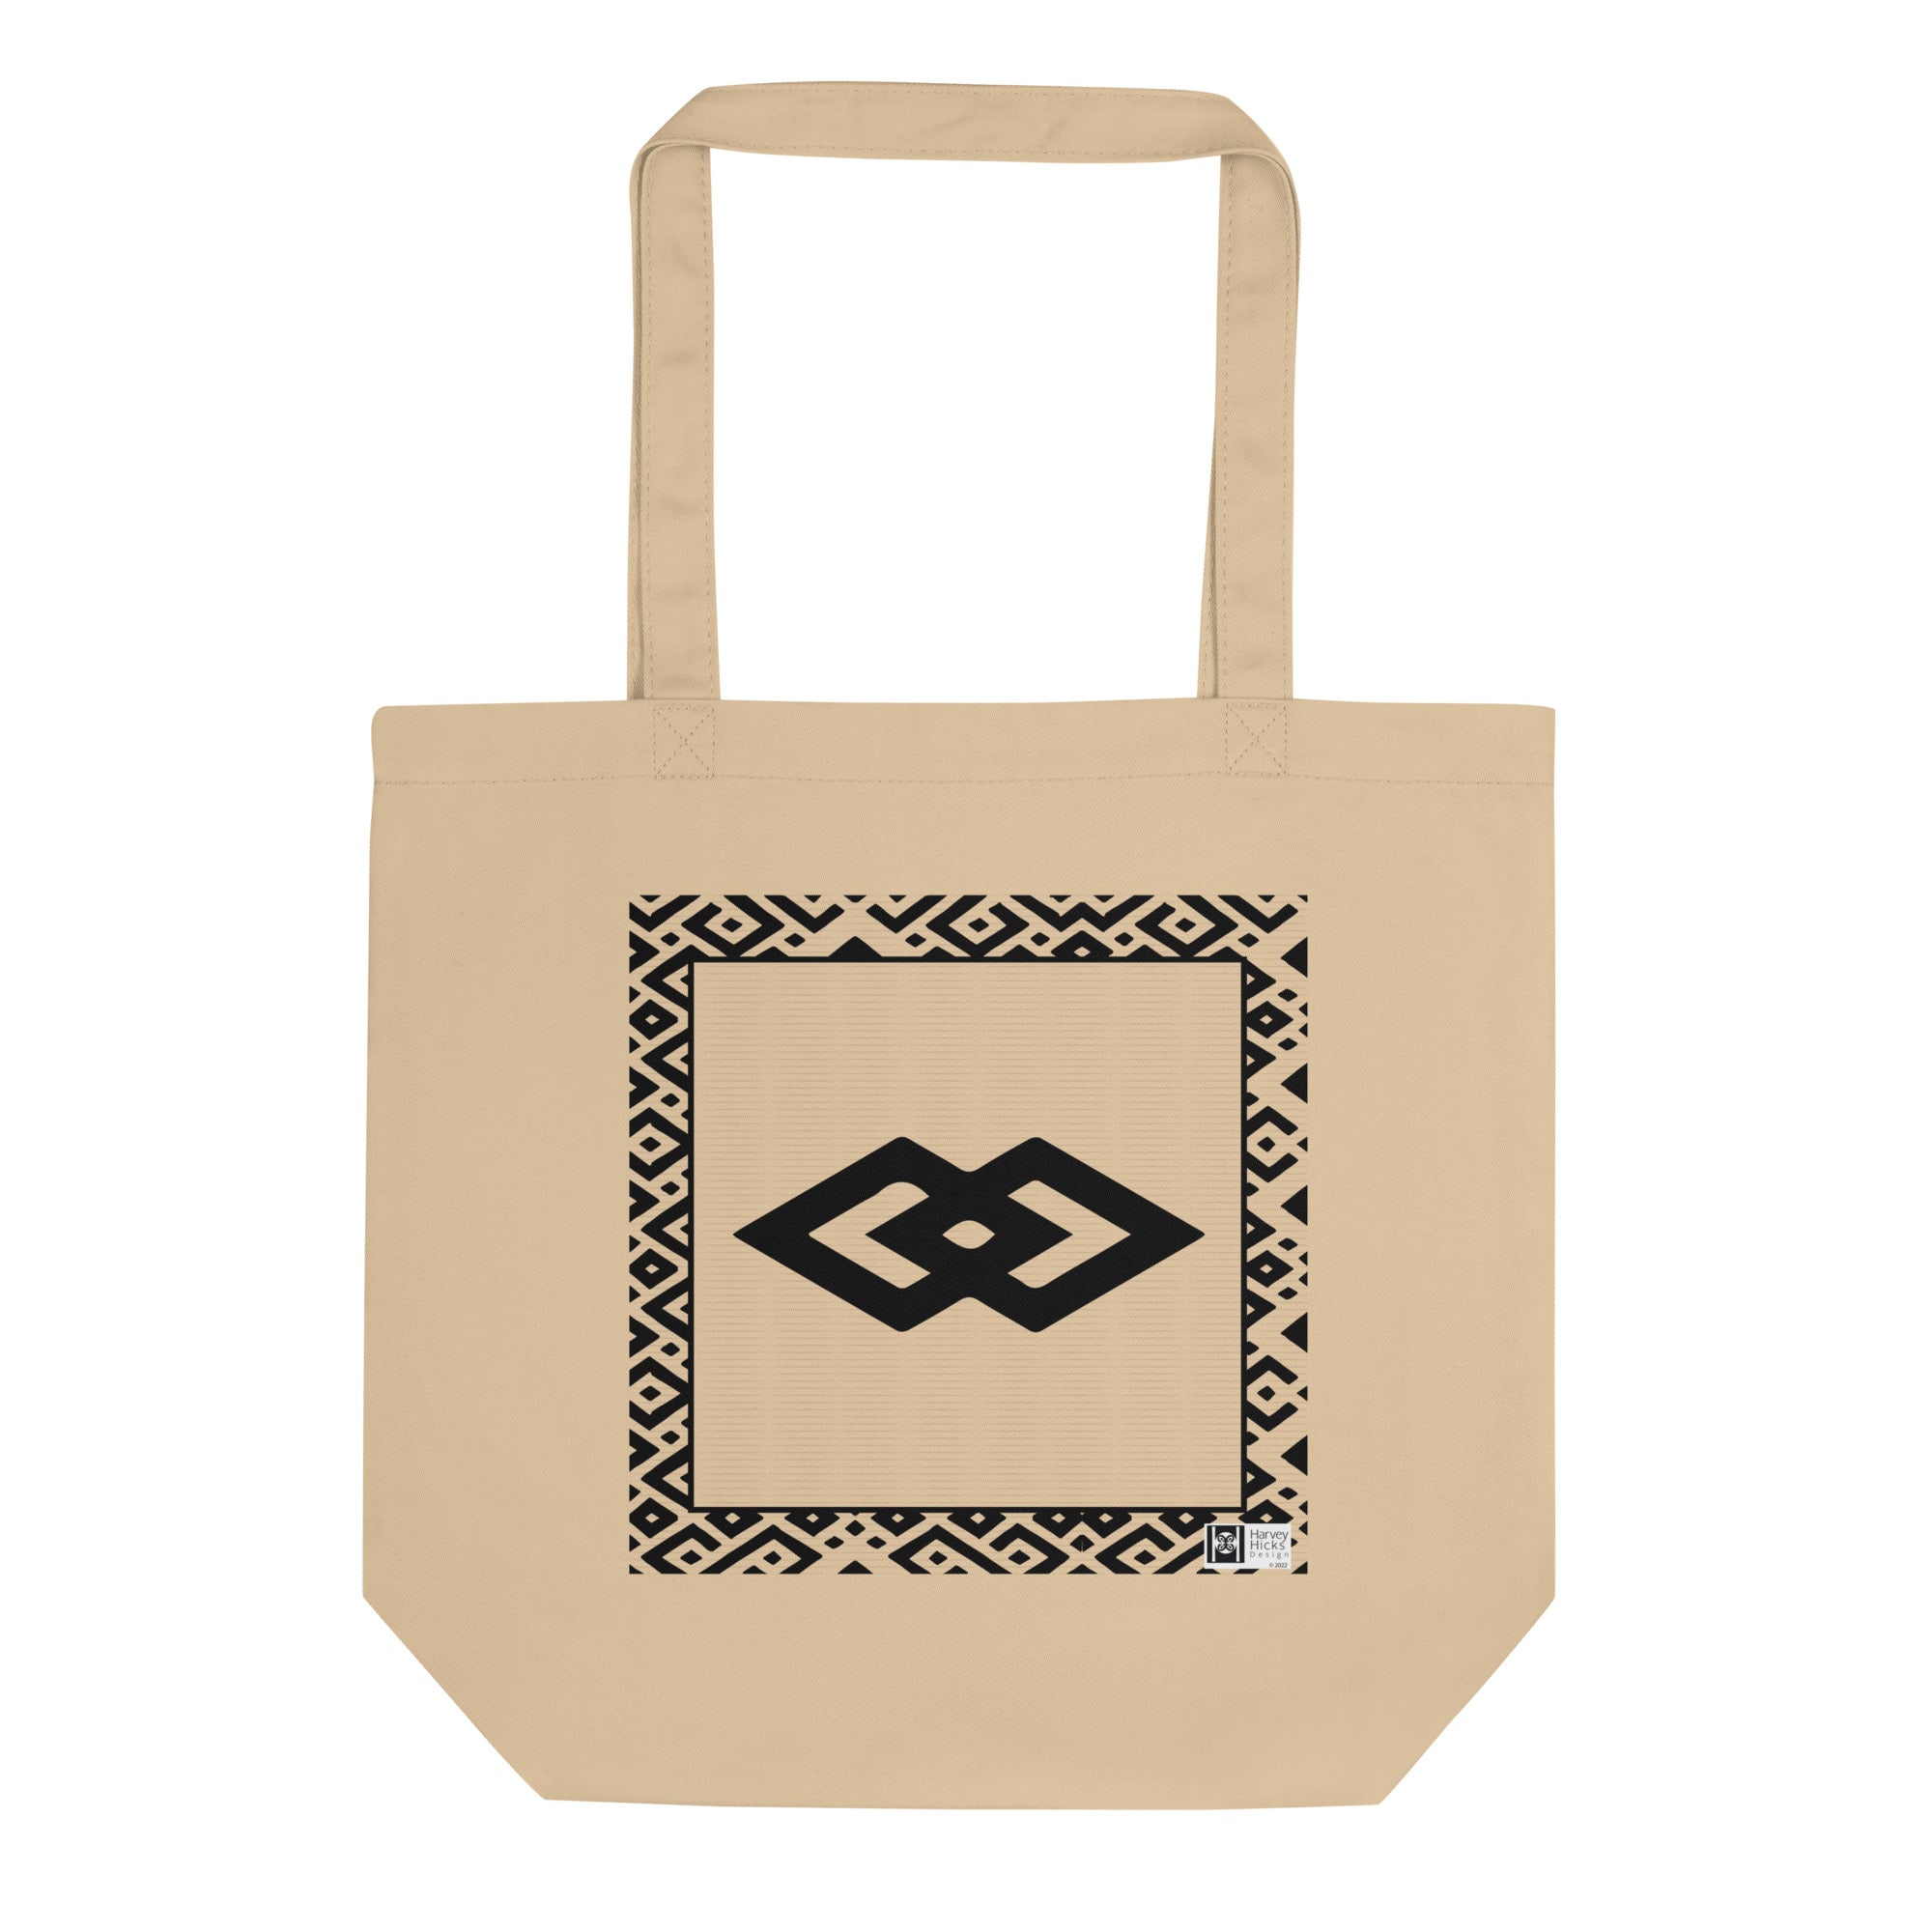 100% cotton Eco Tote Bag, featuring the Adinkra symbol for justice, NO TEXT